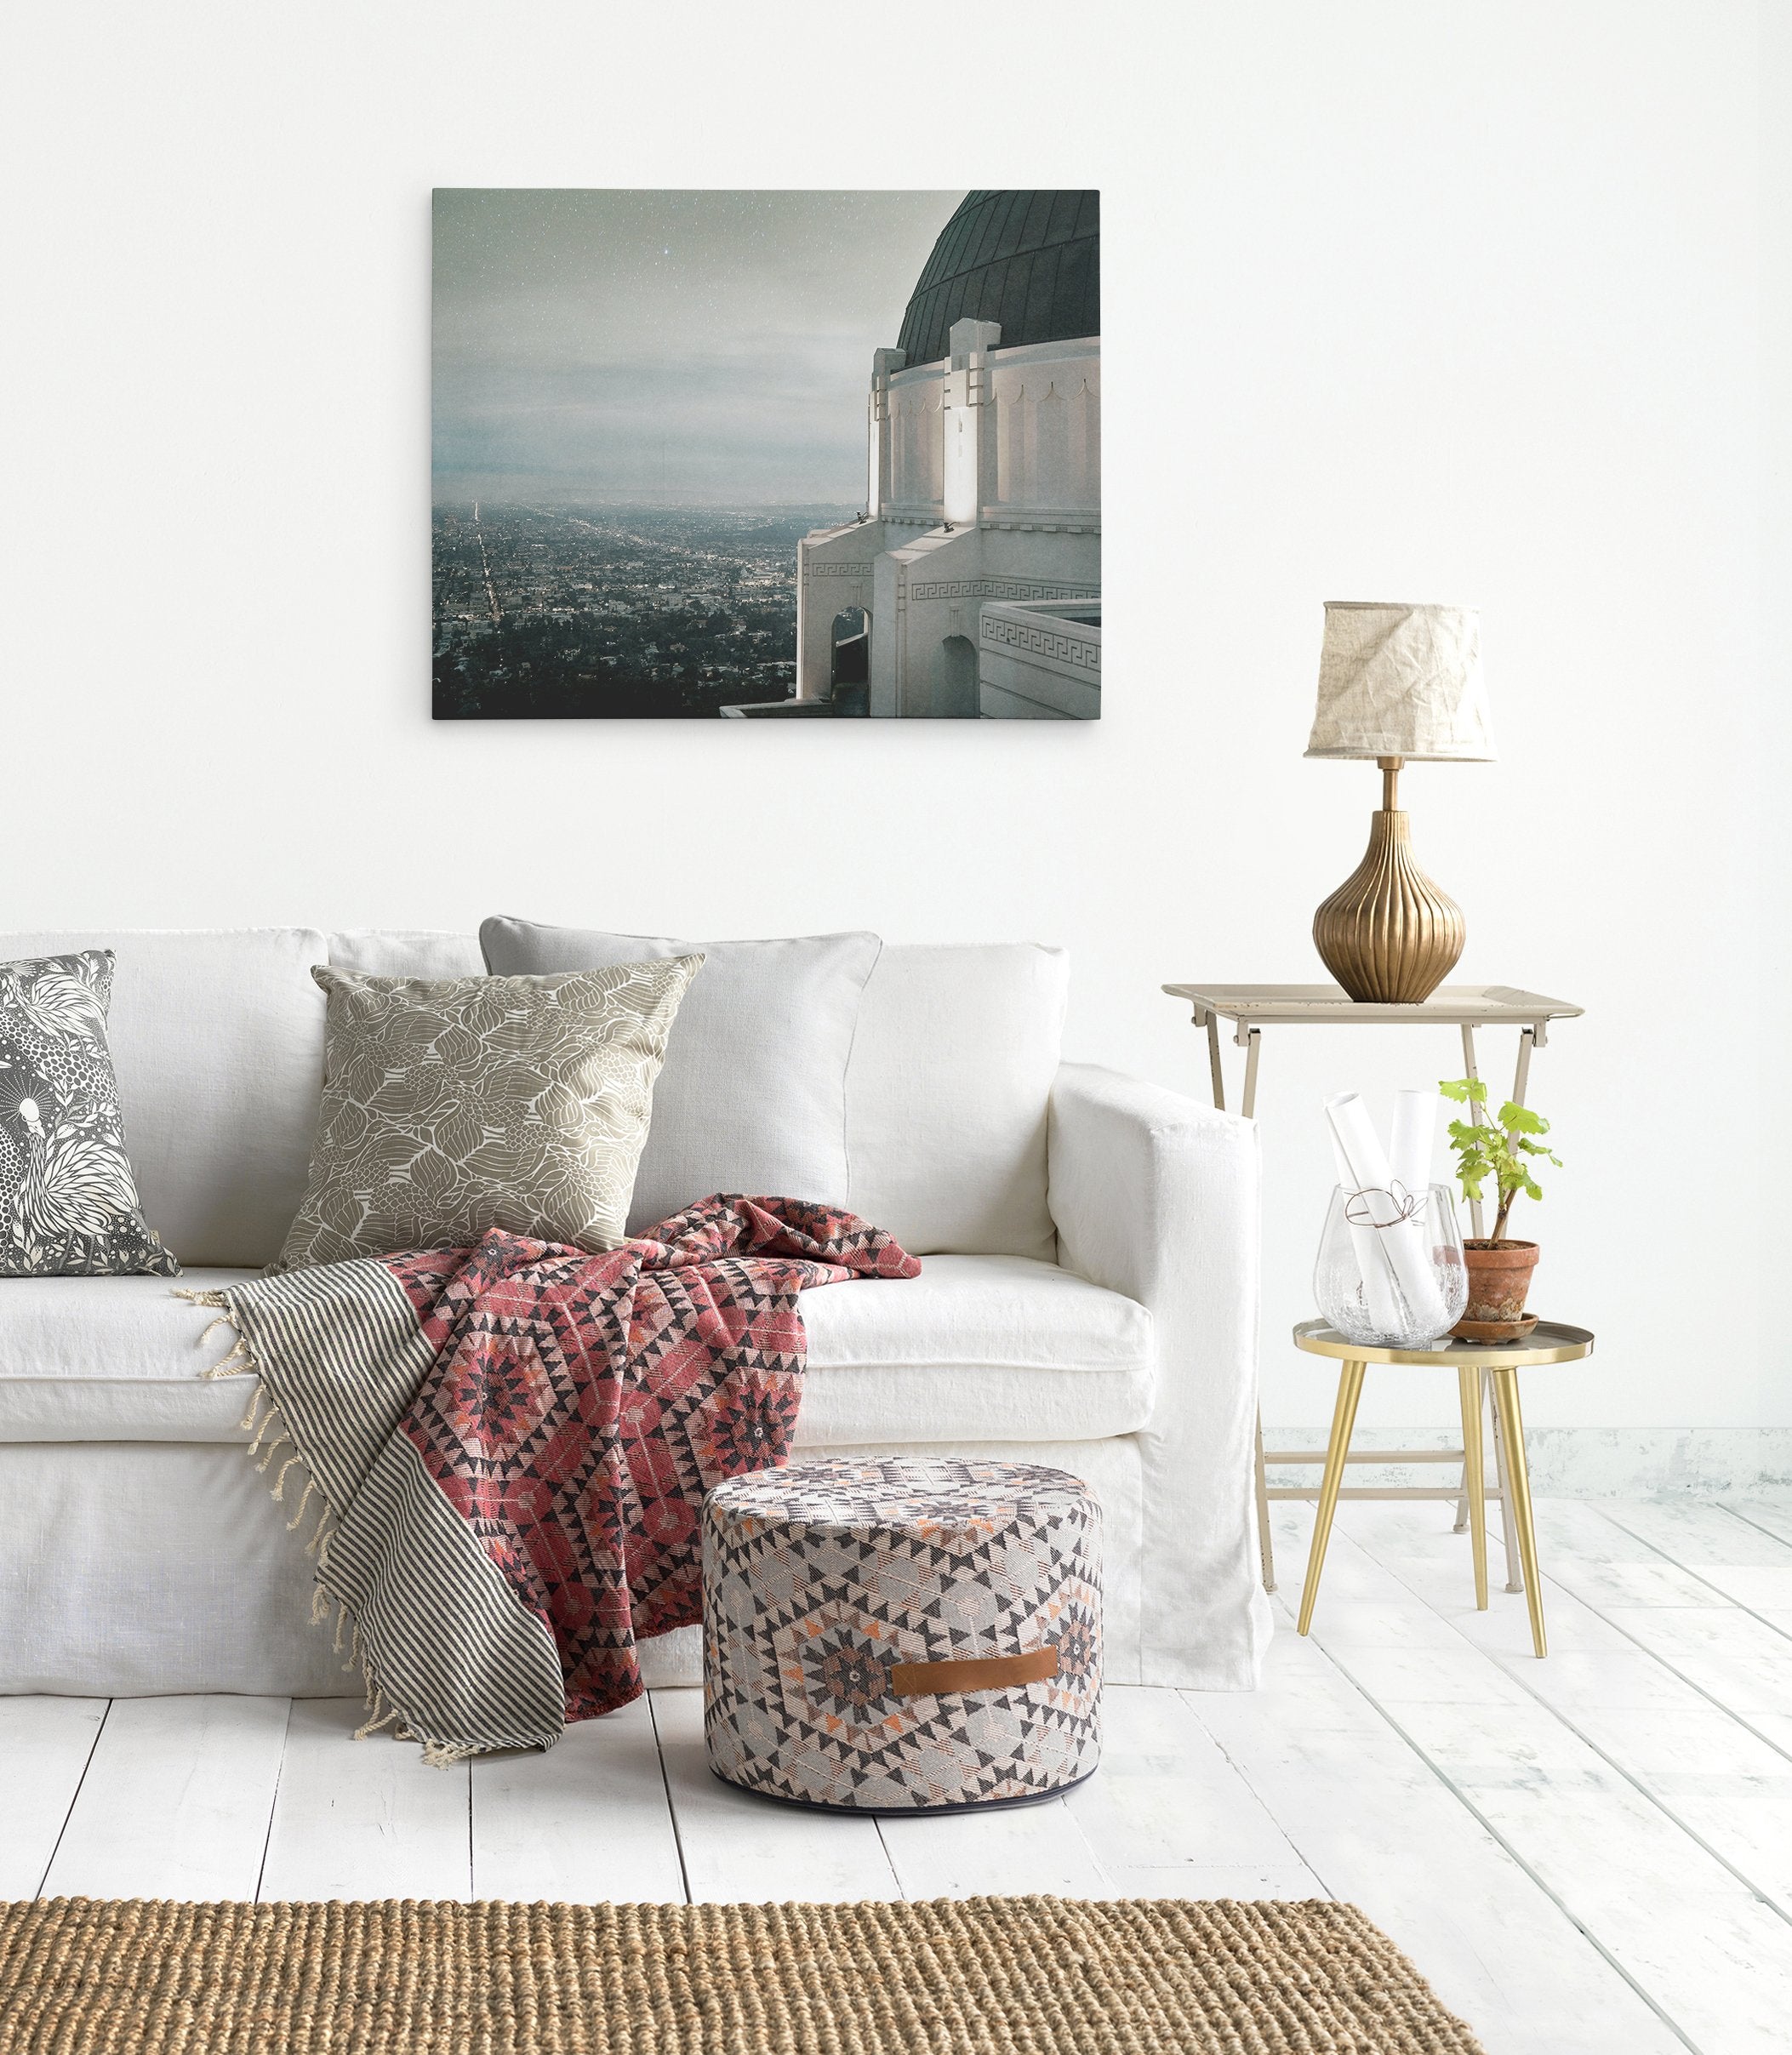 Living room Artwork featuring a Canvas print of a the Griffith observatory in Los Angeles